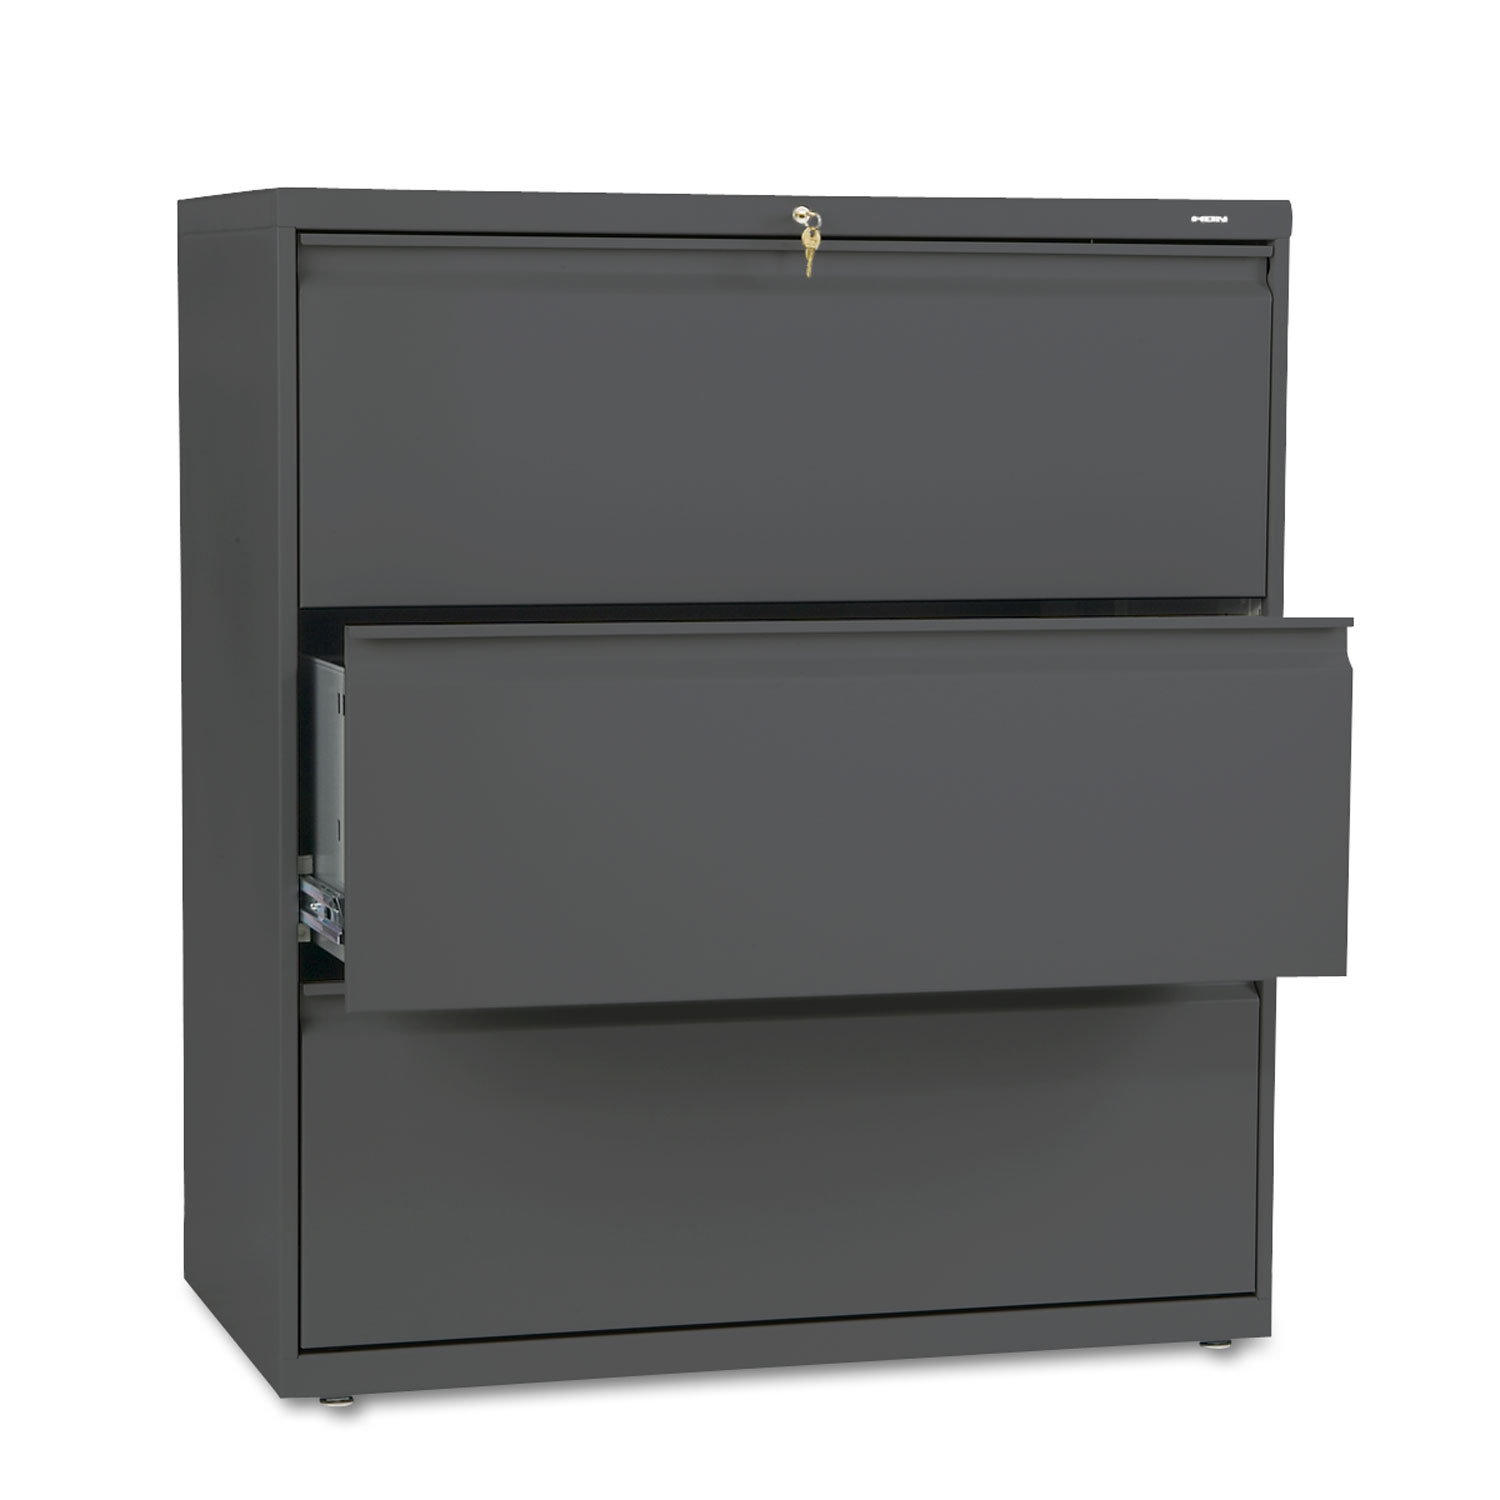 800 Series Three-Drawer Lateral File, 36w x 19-1/4d x 40-7/8h, Charcoal